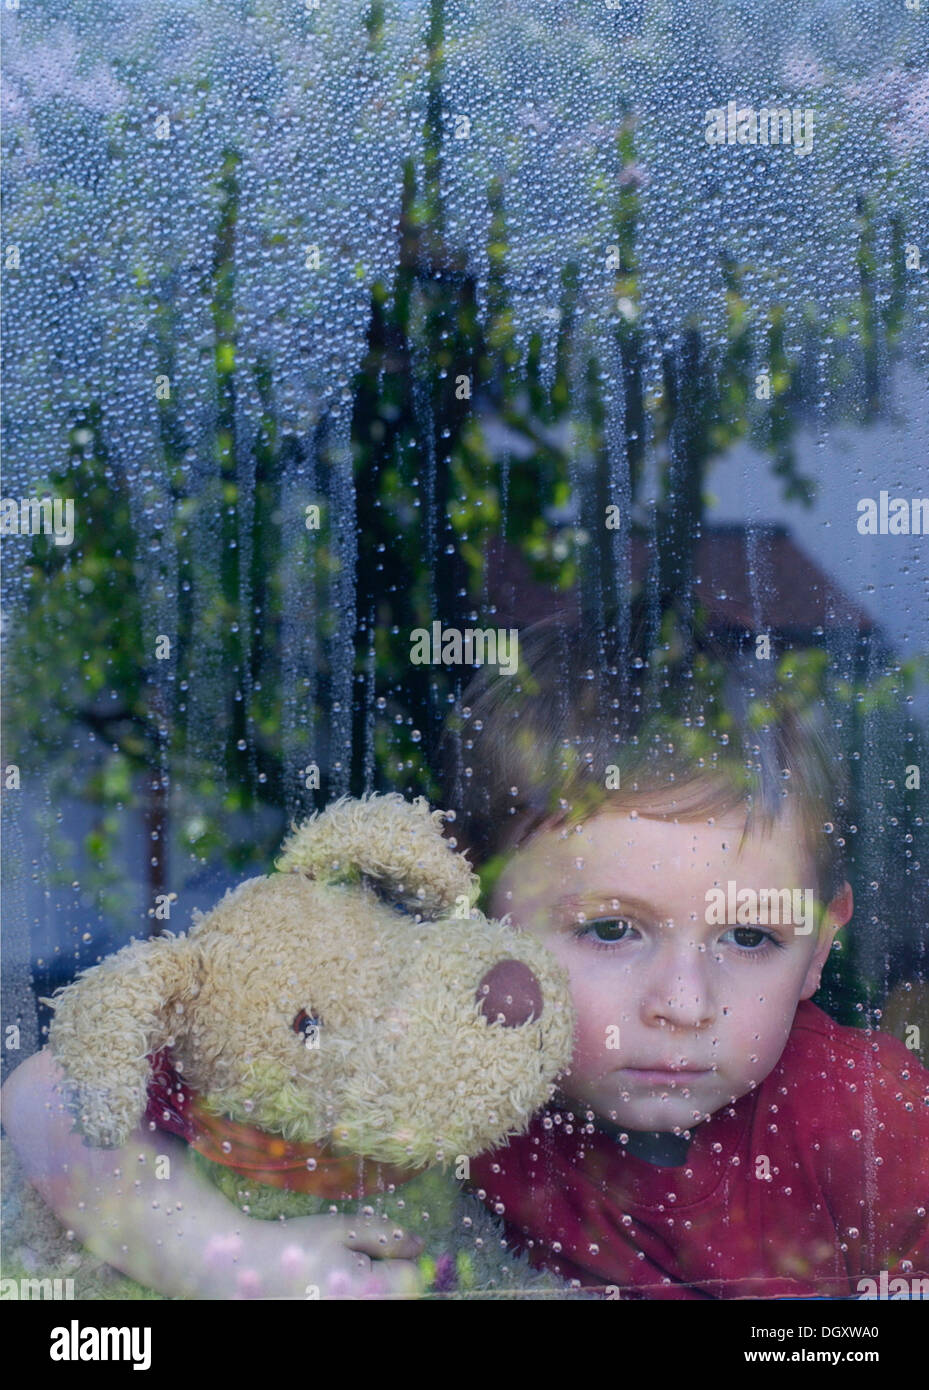 Boy looking sadly out of a window with water drops, holding a stuffed animal in his arms Stock Photo